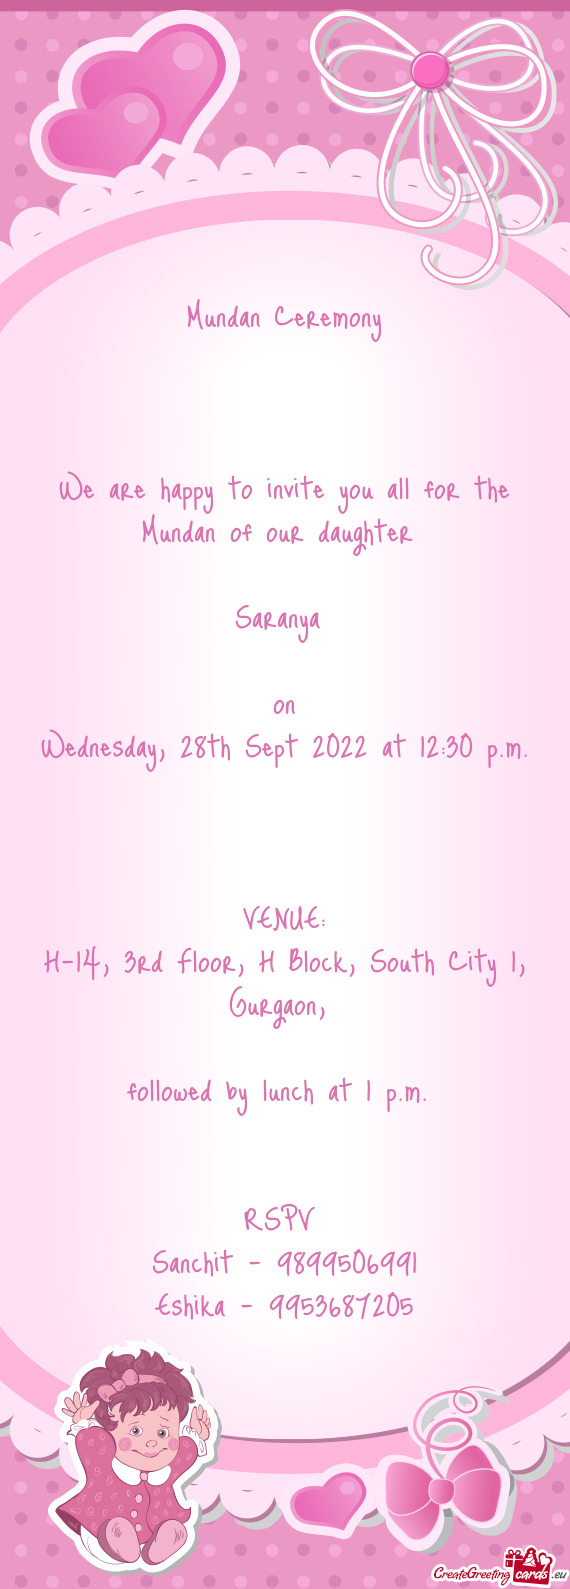 We are happy to invite you all for the Mundan of our daughter